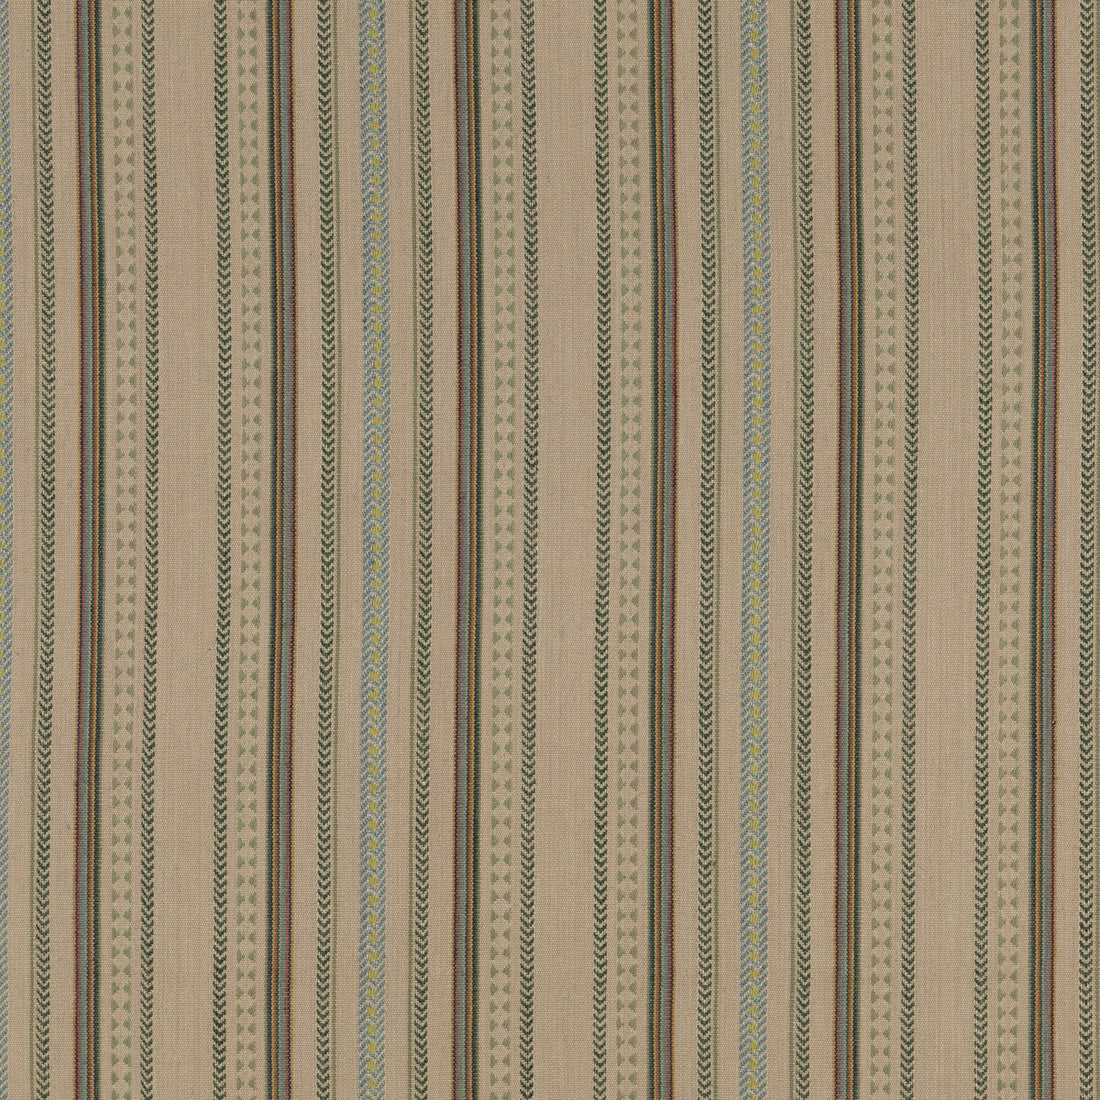 Racing Stripe fabric in lovat color - pattern FD788.R106.0 - by Mulberry in the Mulberry Stripes II collection